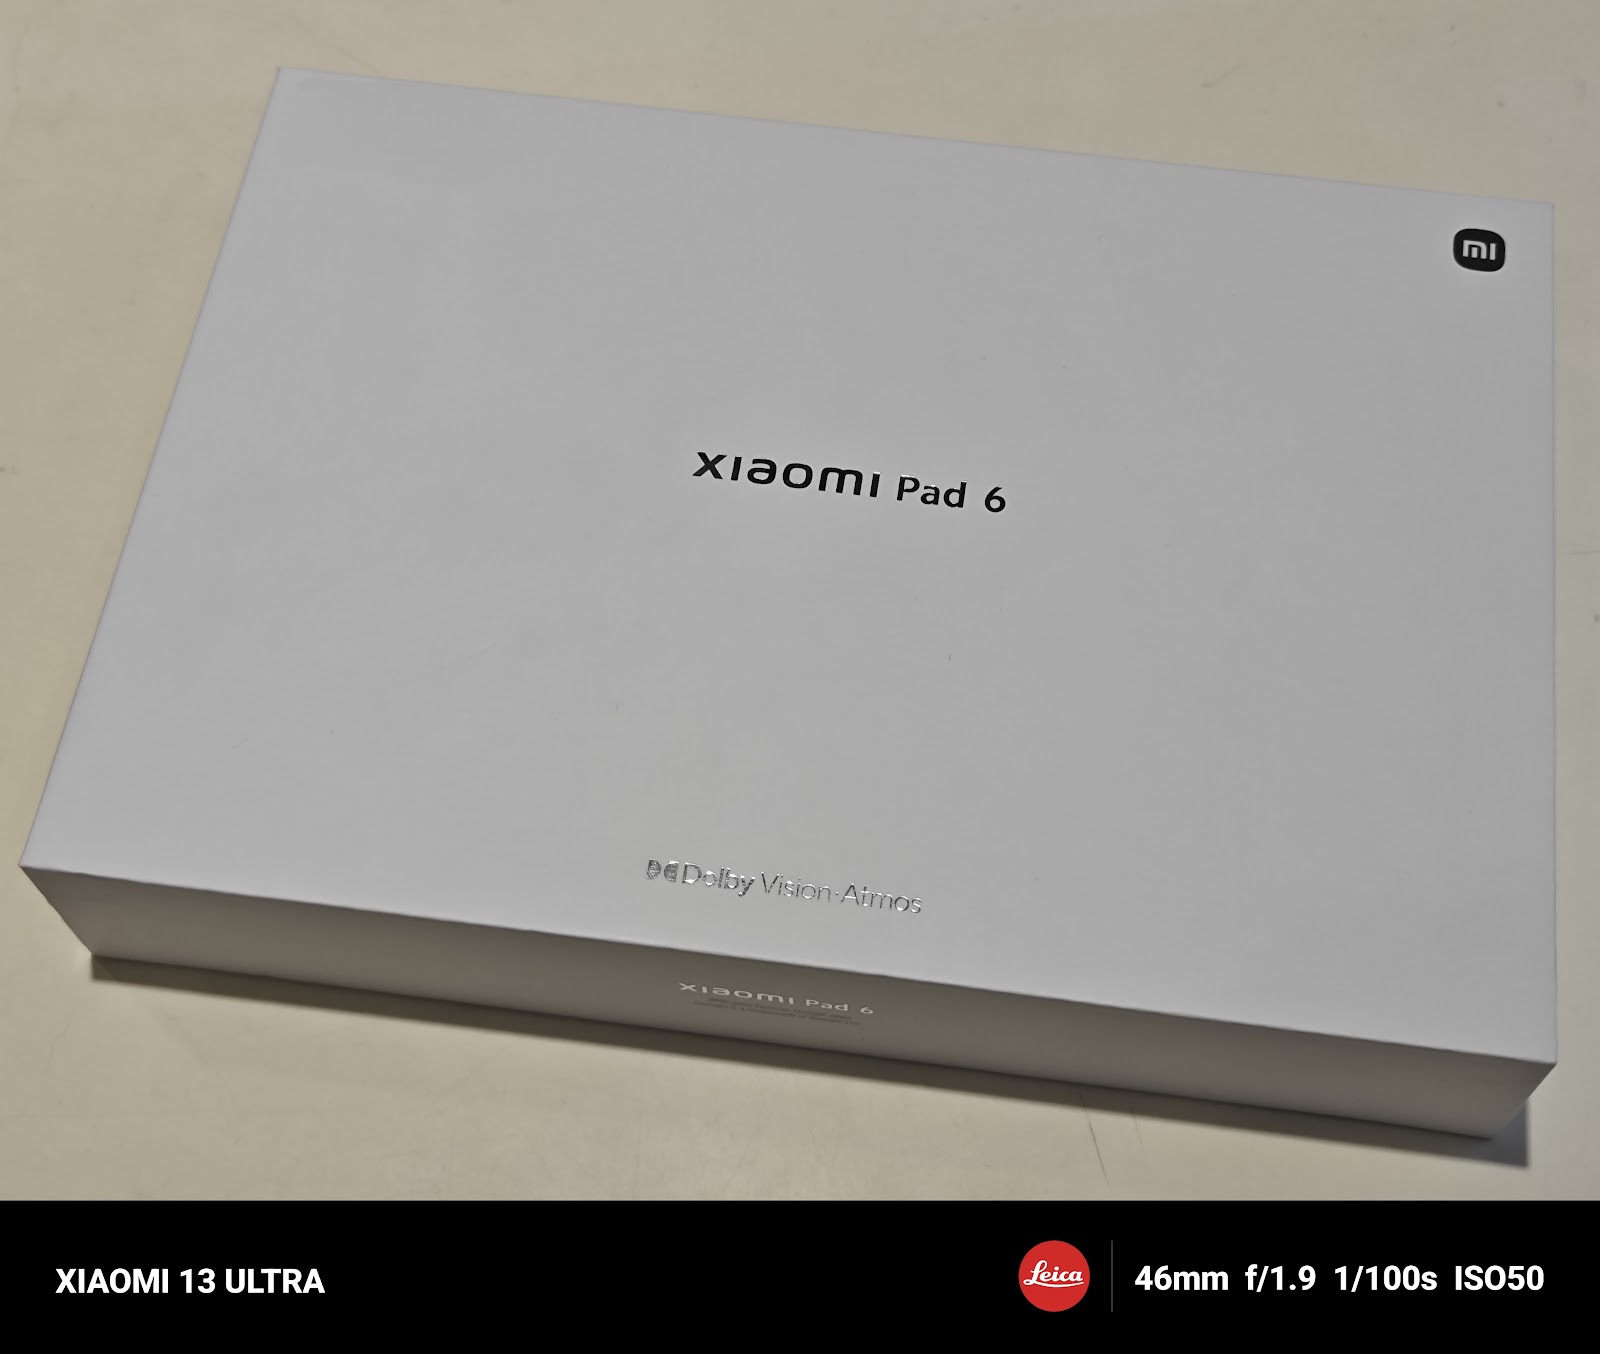 Fast Charge Androidxiaomi Mi Pad 6 Pro 11inch 144hz 2.8k Display